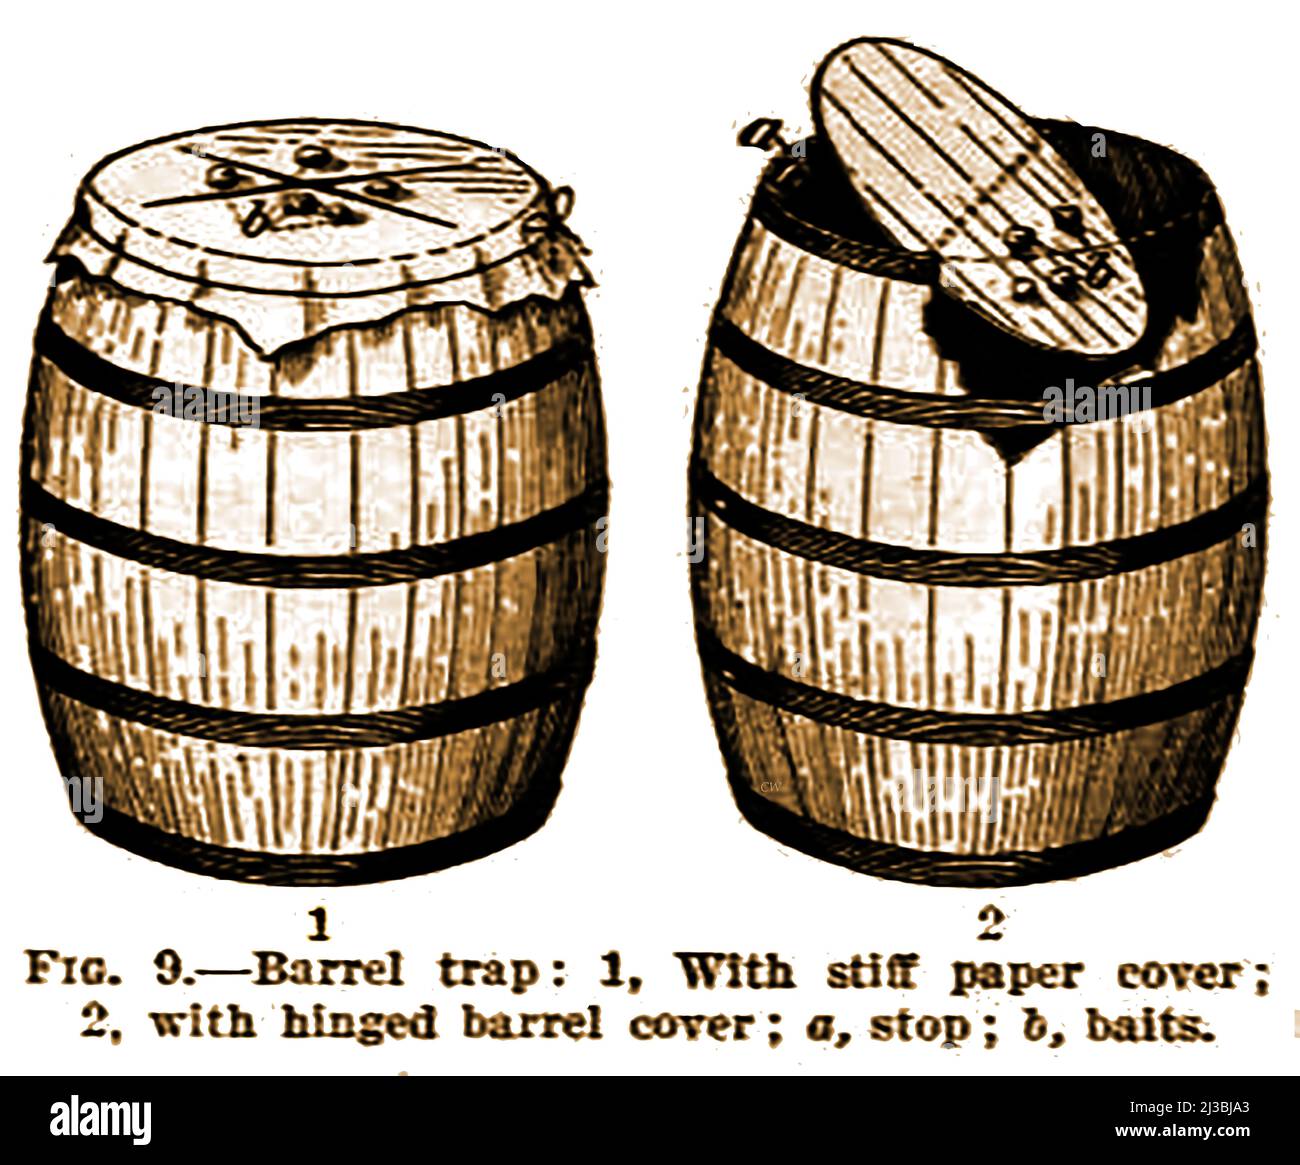 https://c8.alamy.com/comp/2J3BJA3/rat-traps-a-victorian-english-illustration-showing-a-rat-trap-made-from-a-wooden-barrel-with-a-thin-paper-top-and-another-with-a-hinged-swivel-top-both-designed-to-catch-the-vermin-in-the-barrel-as-it-jumps-on-top-to-retrieve-the-bait-2J3BJA3.jpg